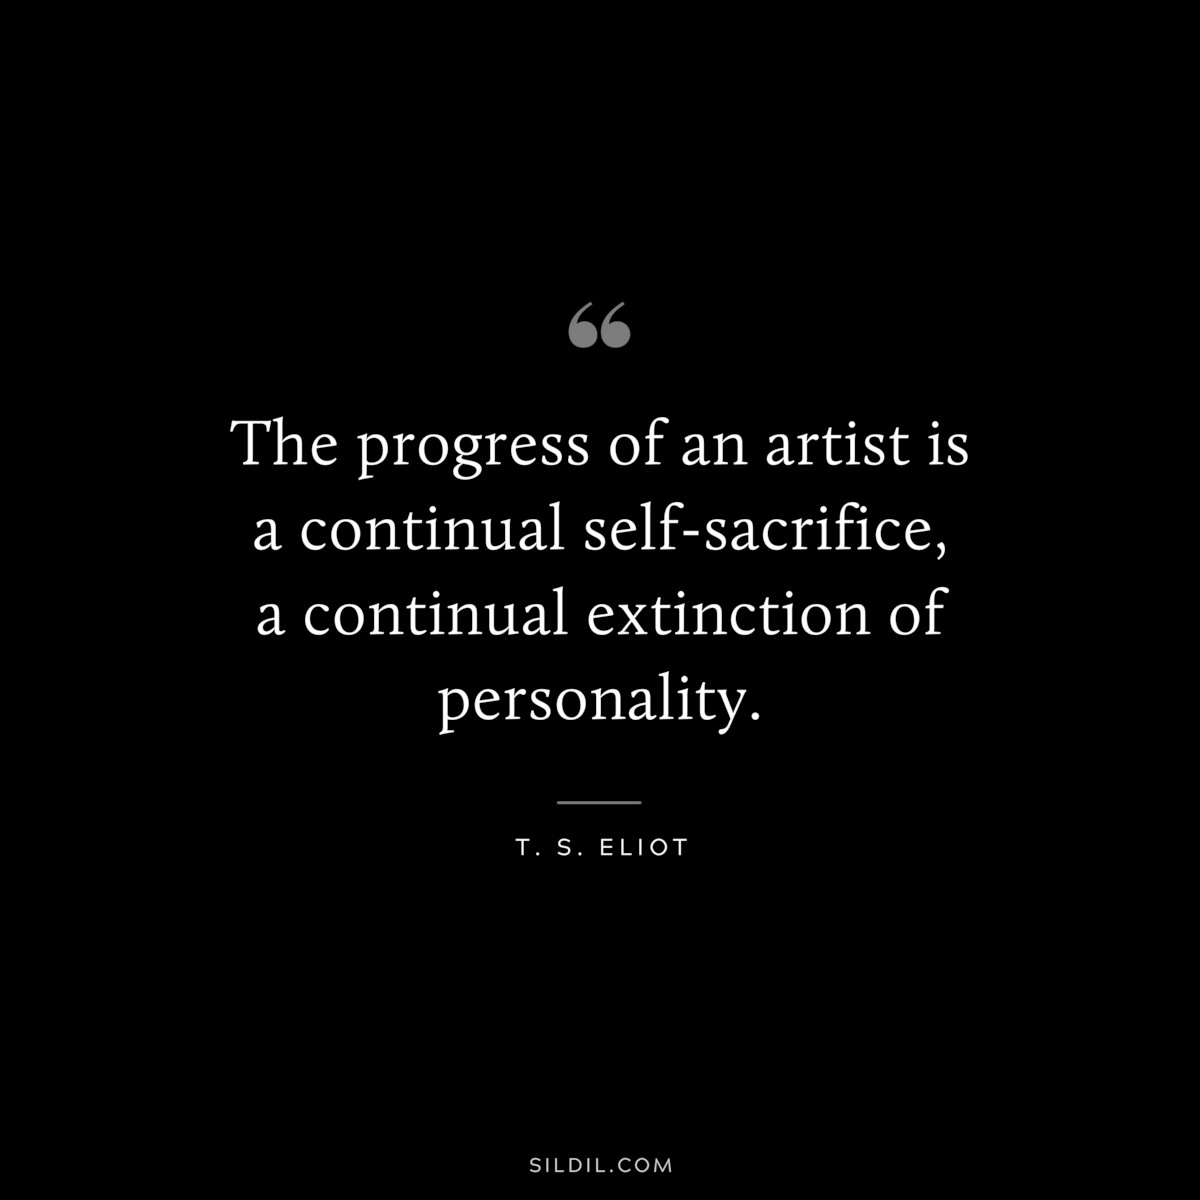 The progress of an artist is a continual self-sacrifice, a continual extinction of personality. ― T. S. Eliot